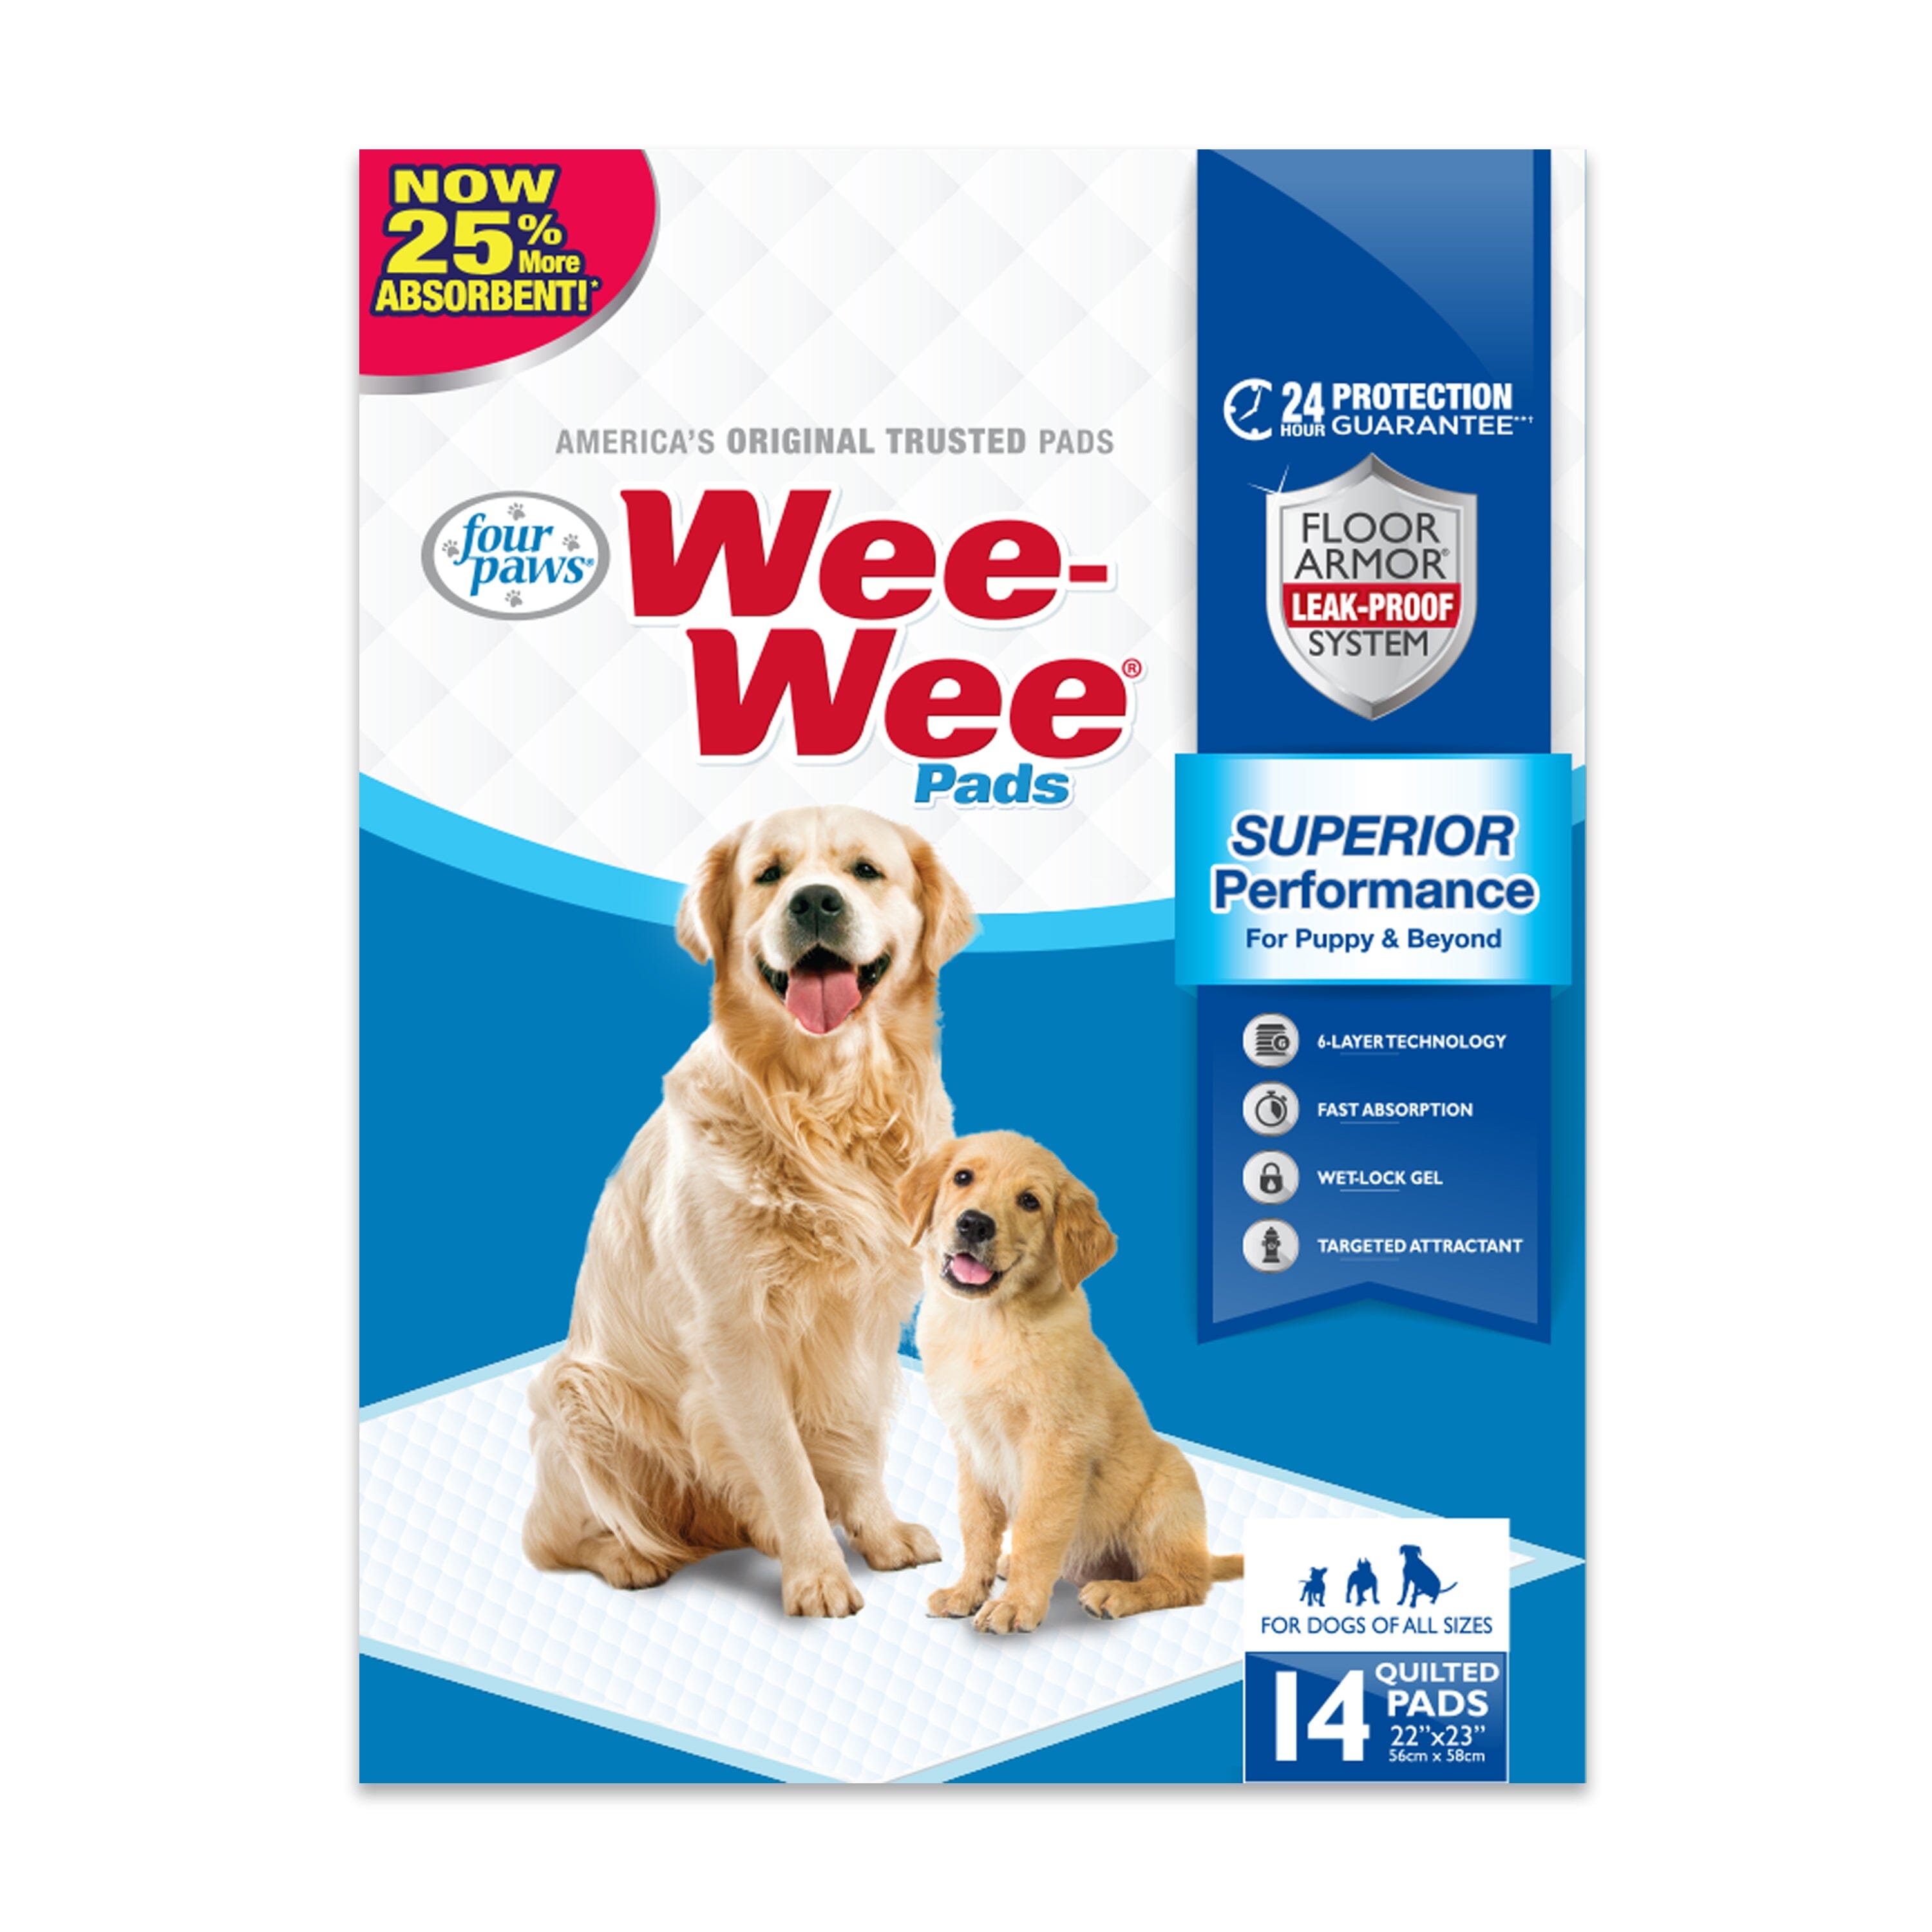 Four Paws Wee-Wee Superior Performance Puppy & Dog Training Pads 14 Count - Standard 22 in X 23 in  